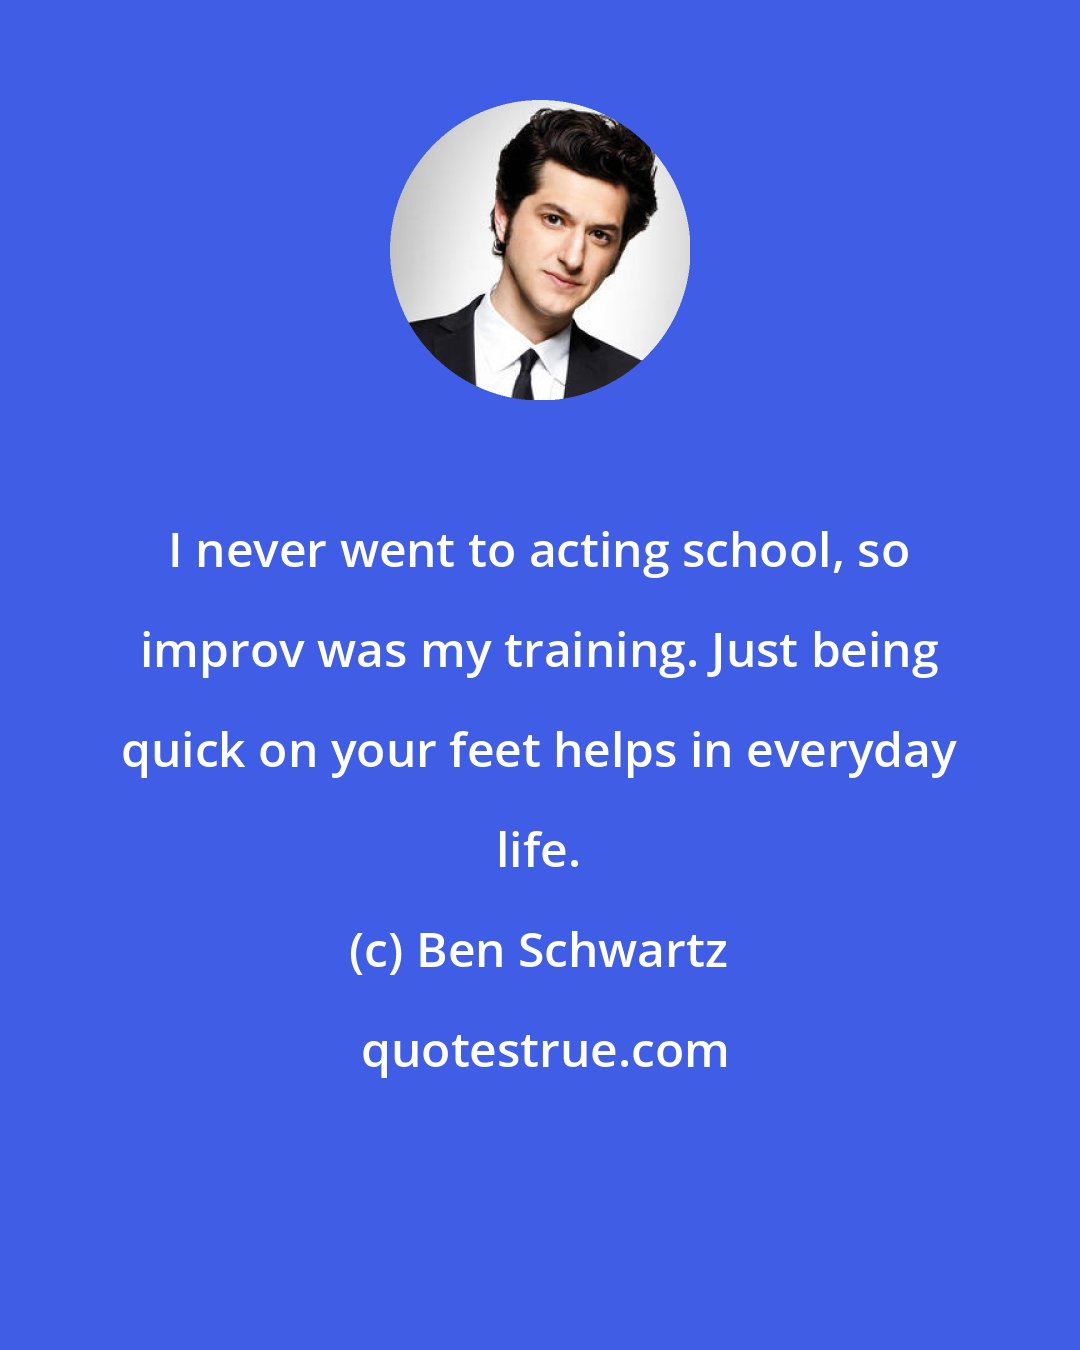 Ben Schwartz: I never went to acting school, so improv was my training. Just being quick on your feet helps in everyday life.